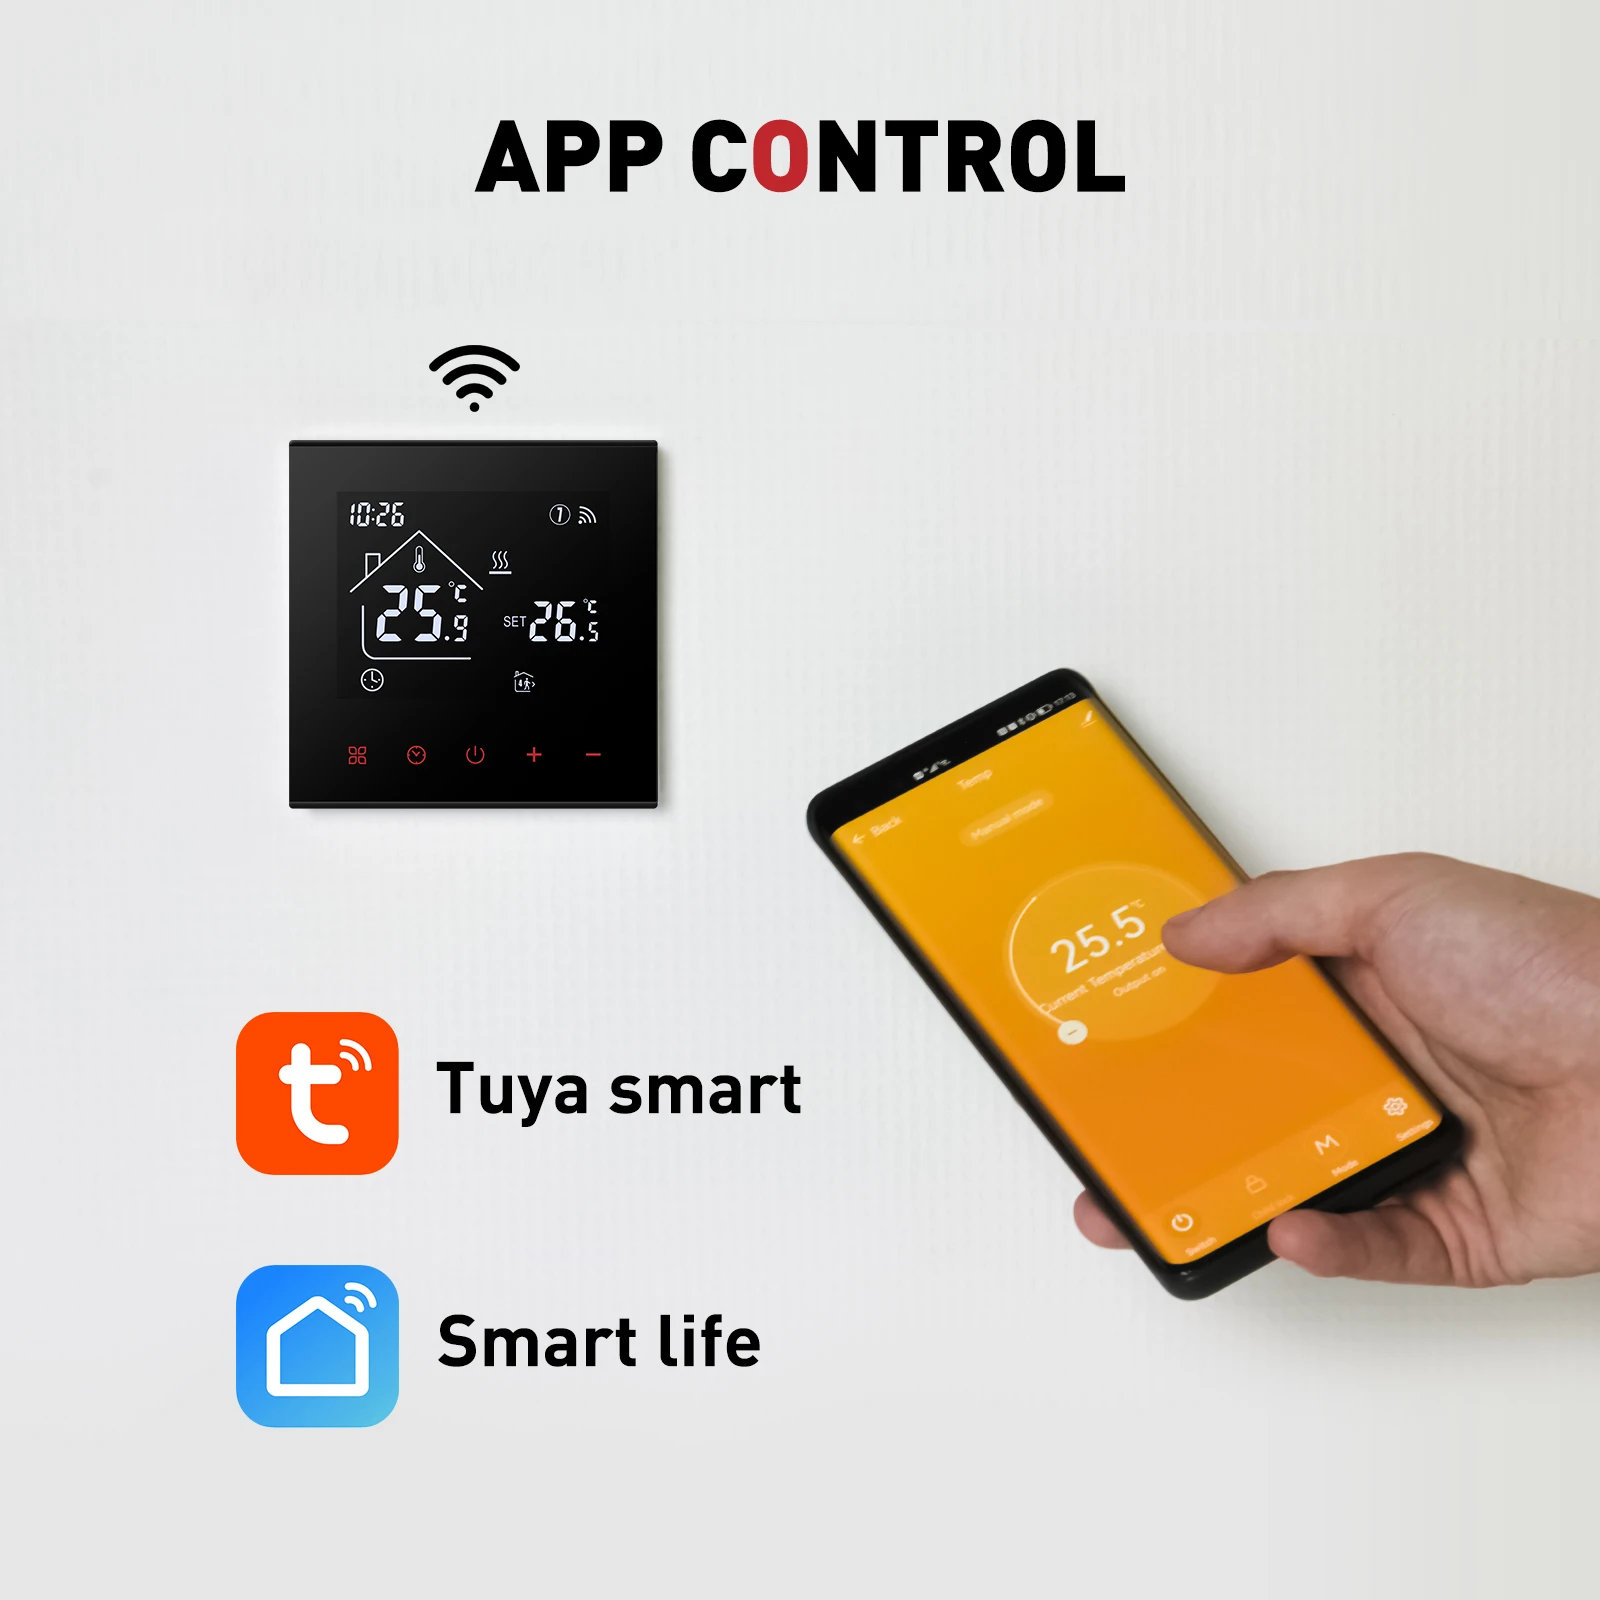 House Home Warm Floor Thermostat Tuya Wifi for Smart House Home Heating Temperat - $87.00